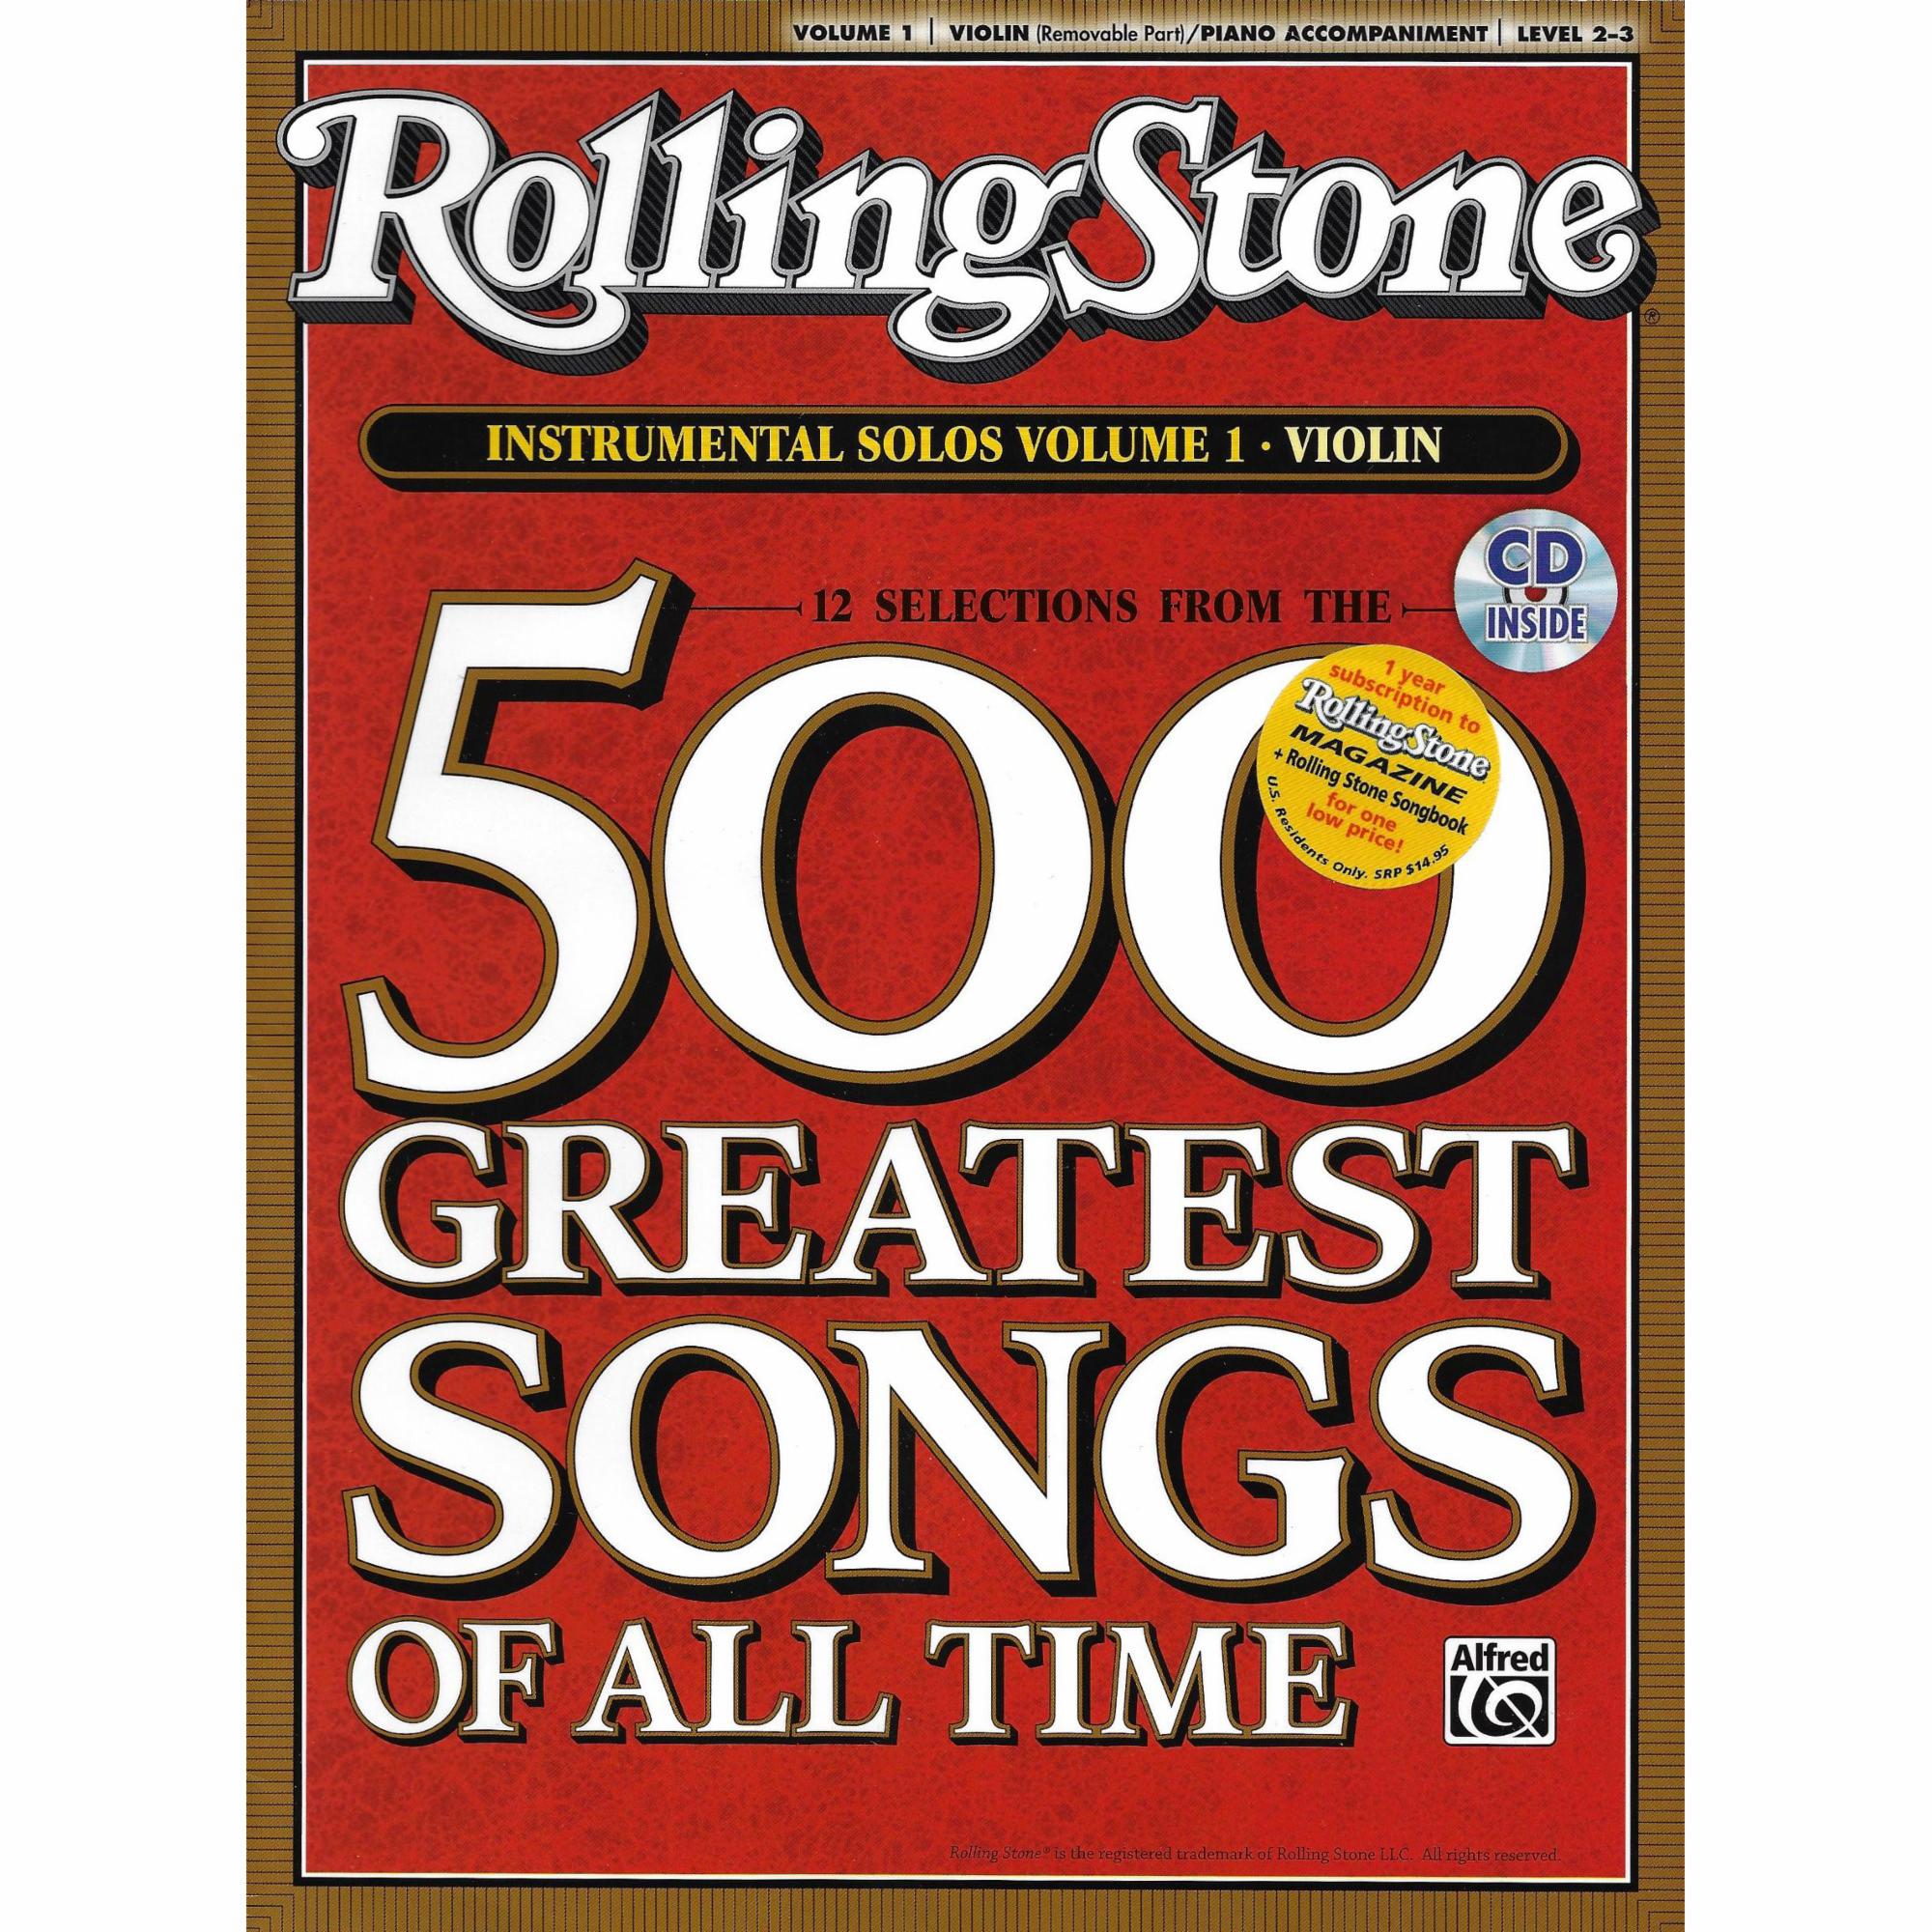 Selections from Rolling Stone's 500 Greatest Songs, Vol. 1 for Violin, Viola, or Cello and Piano